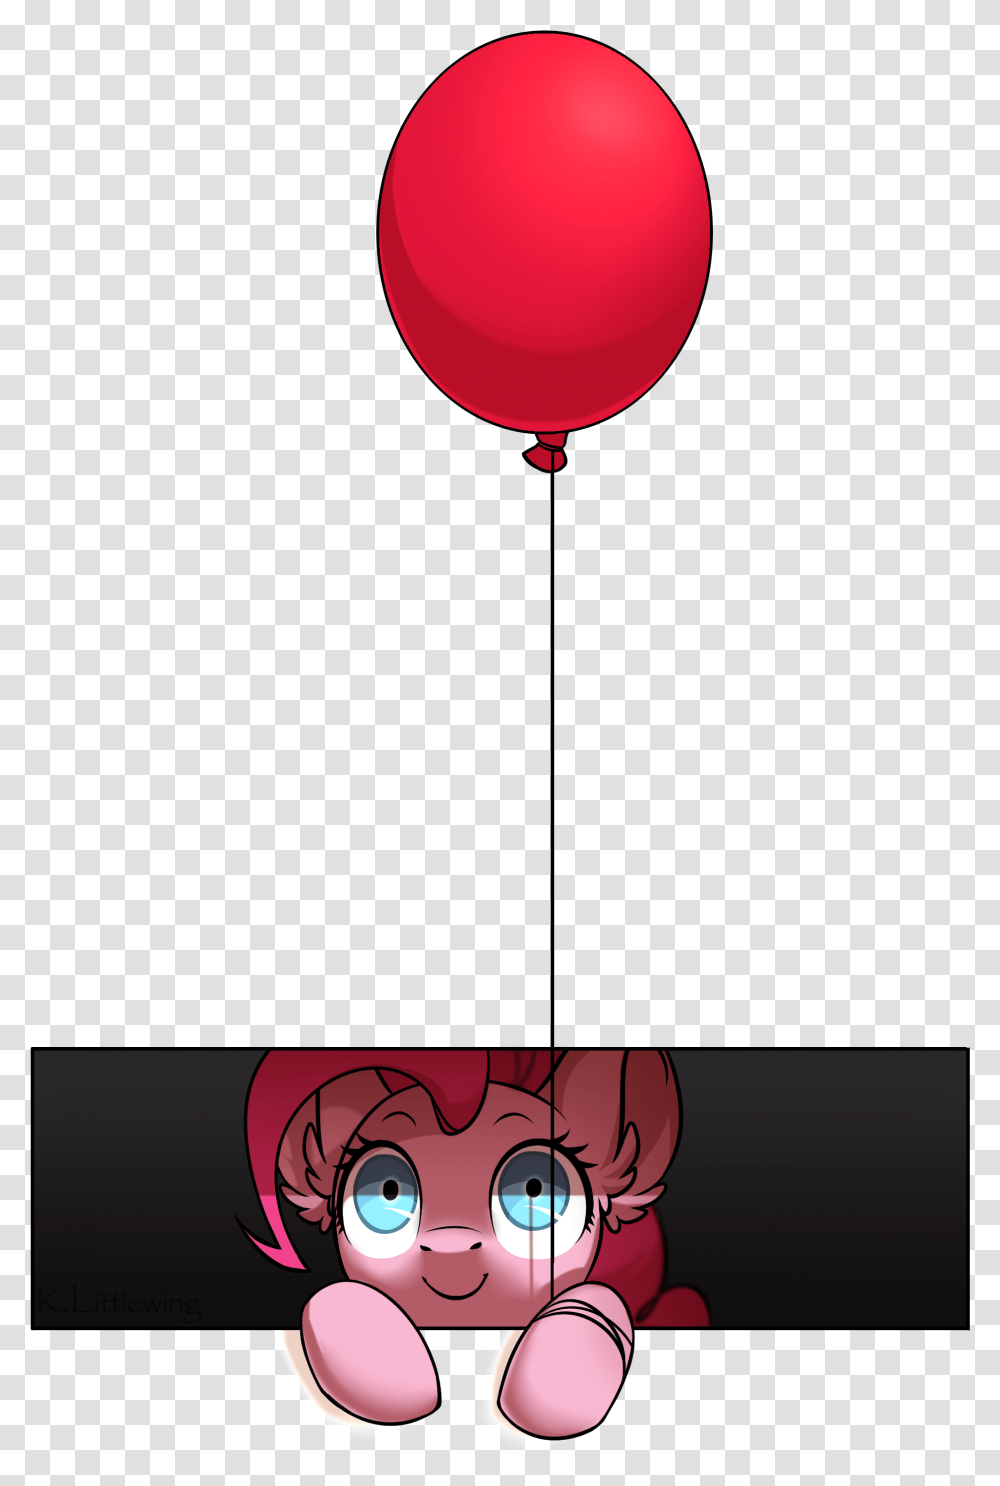 Balloon Pennywise Frames Illustrations Hd Images Balloon Red Creepy Transparent Png